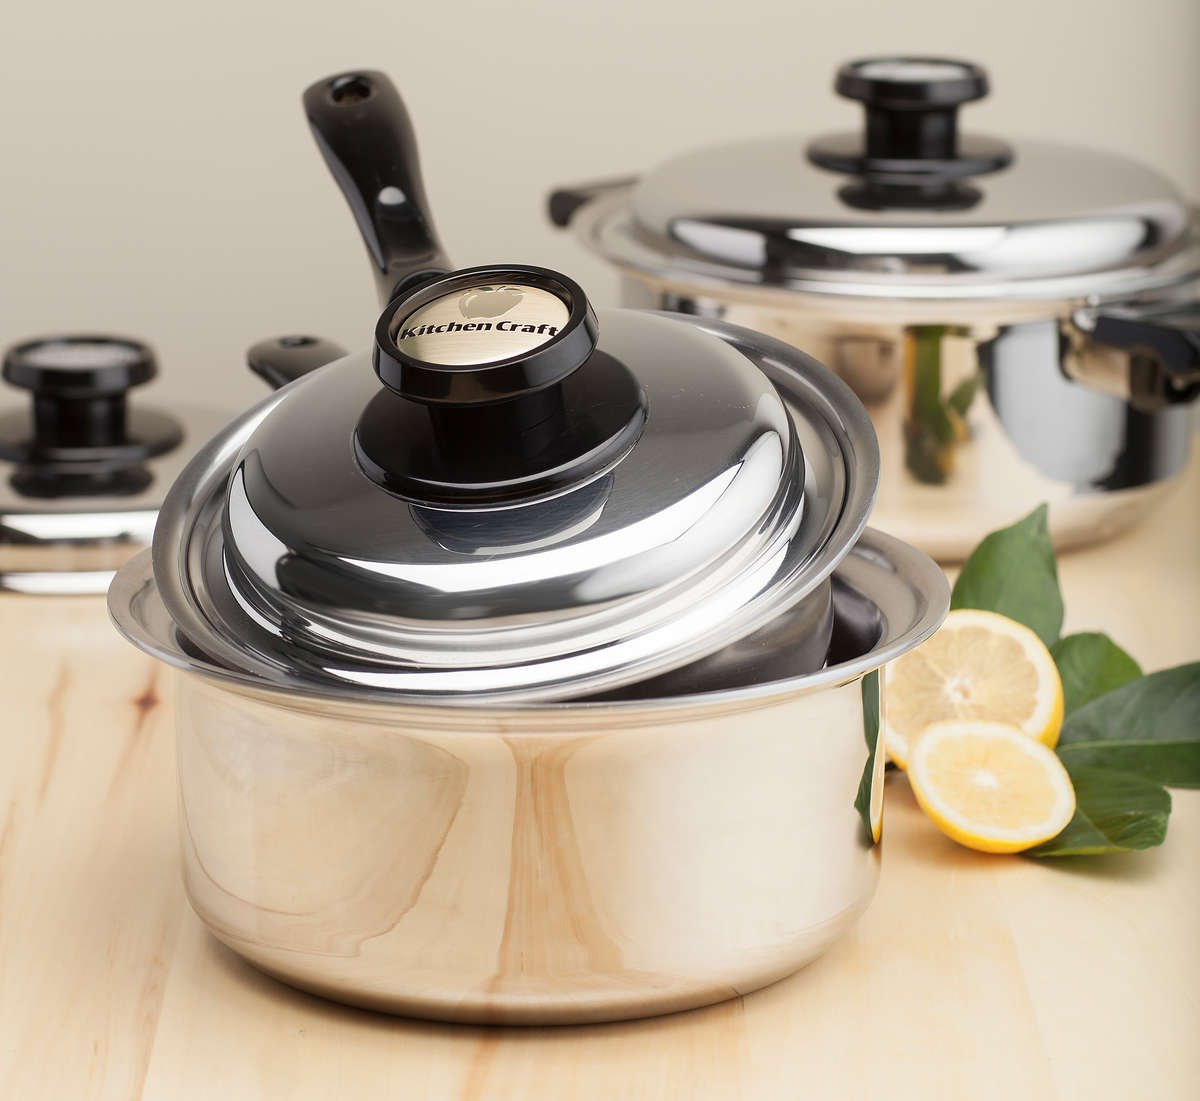 Waterless Cookware: A Detailed Analysis